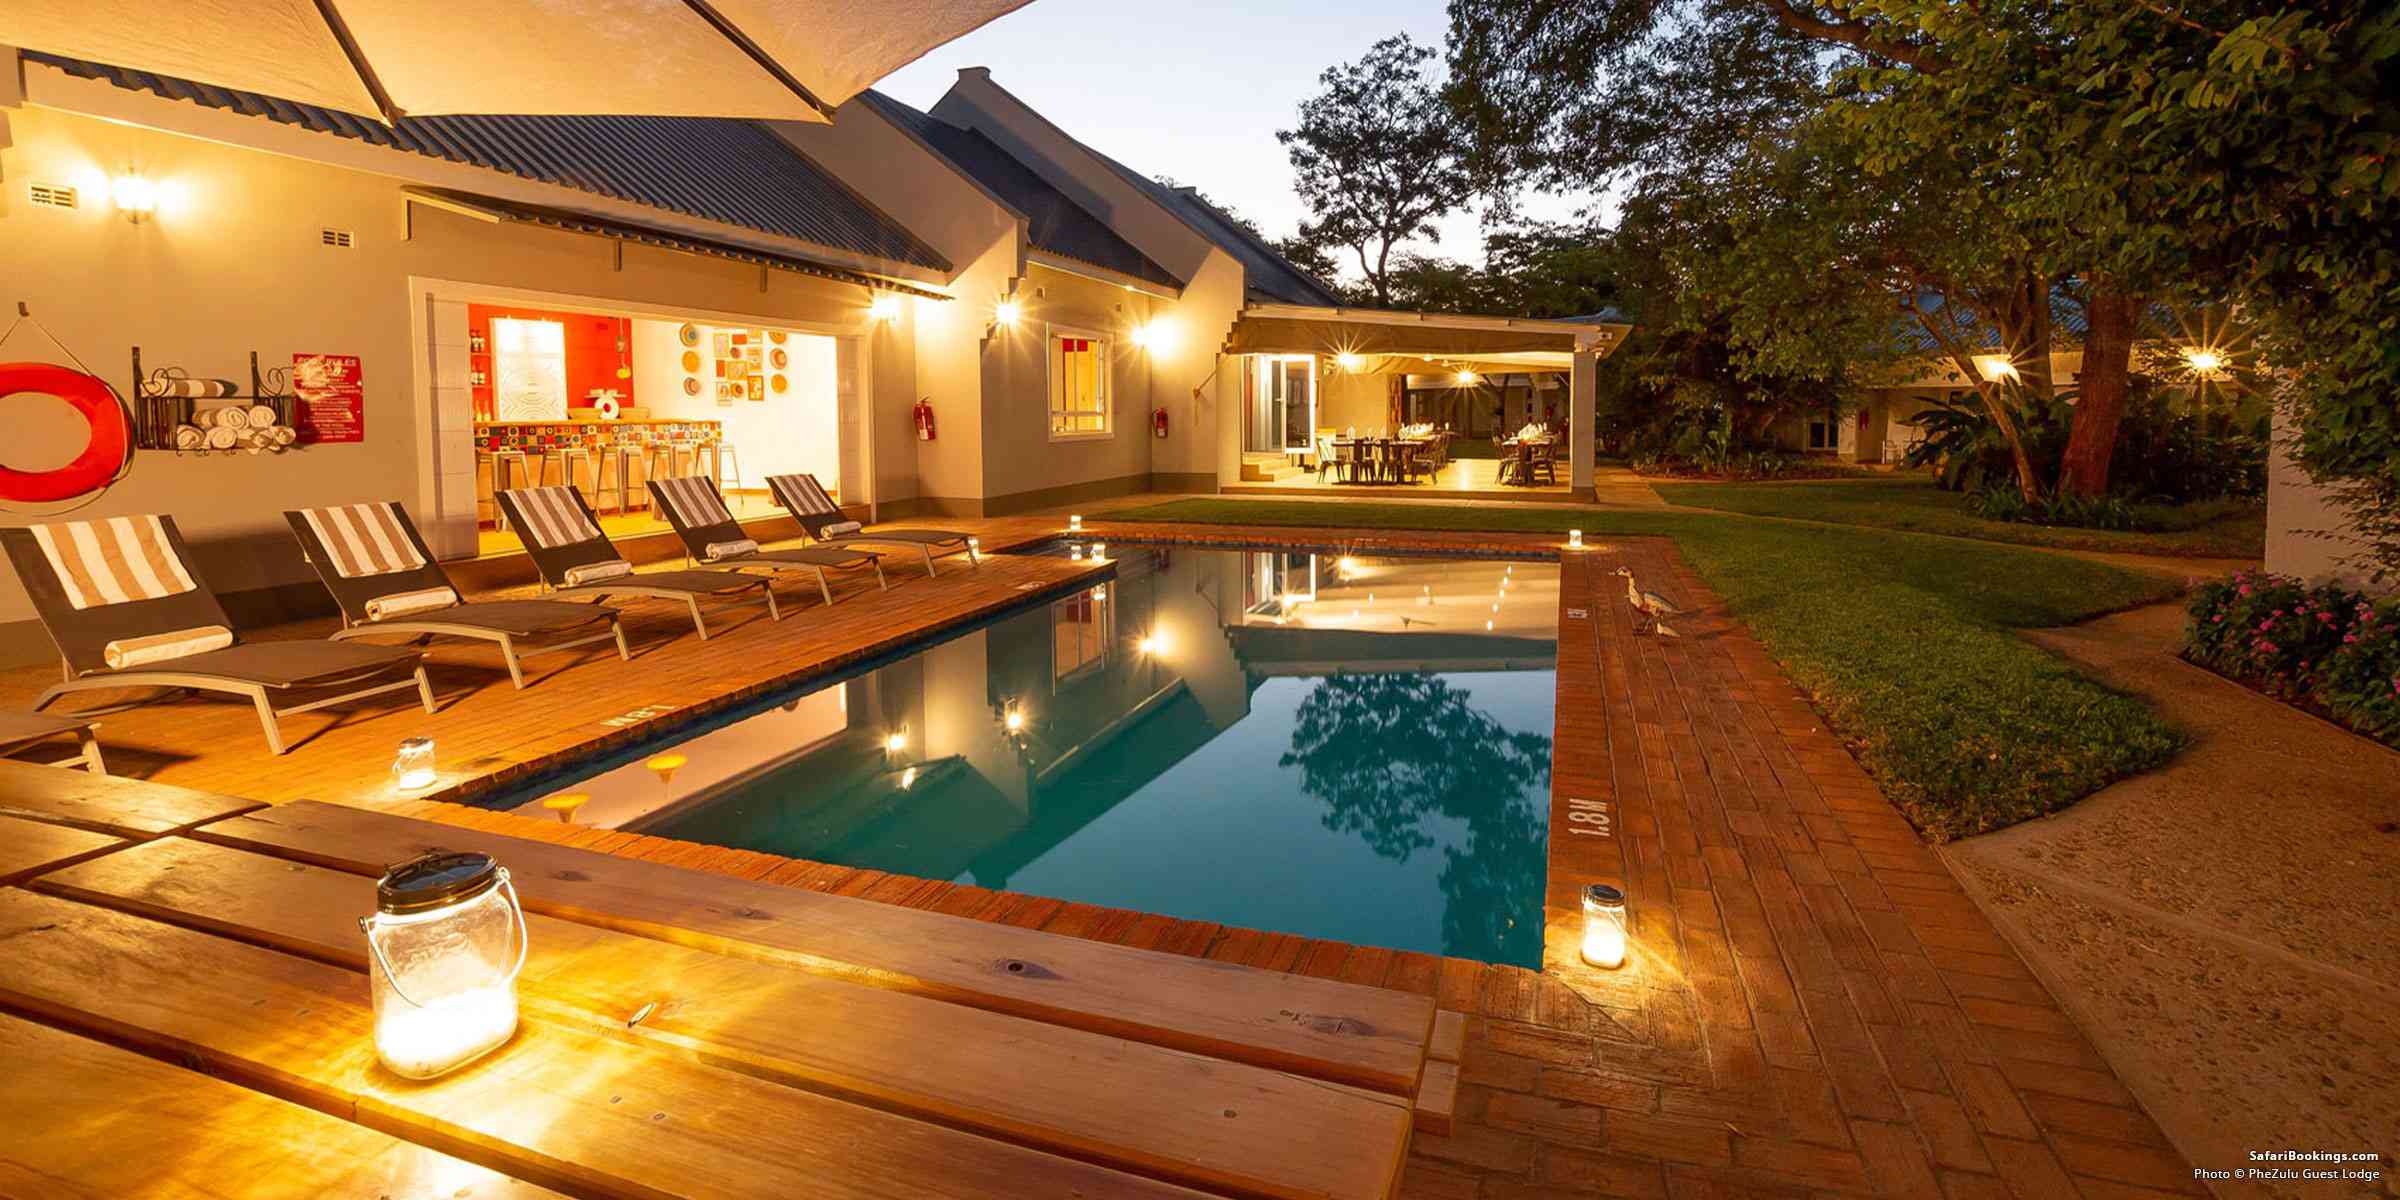 Top 8 Good-value Accommodations in Zimbabwe